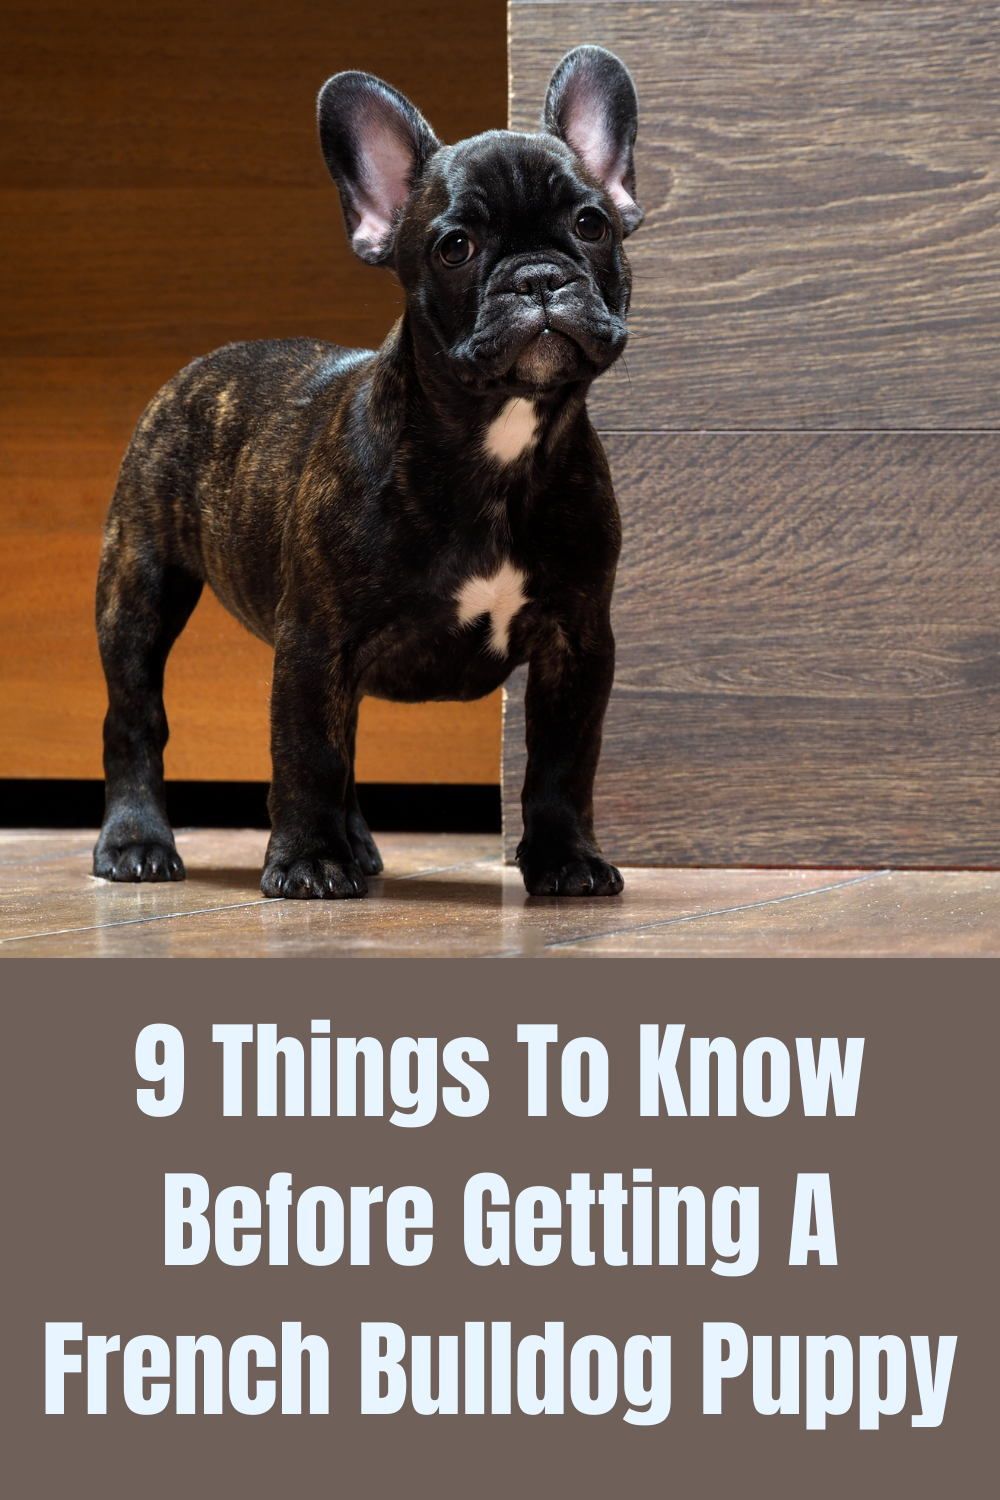 9 Things To Know Before Getting A French Bulldog Puppy